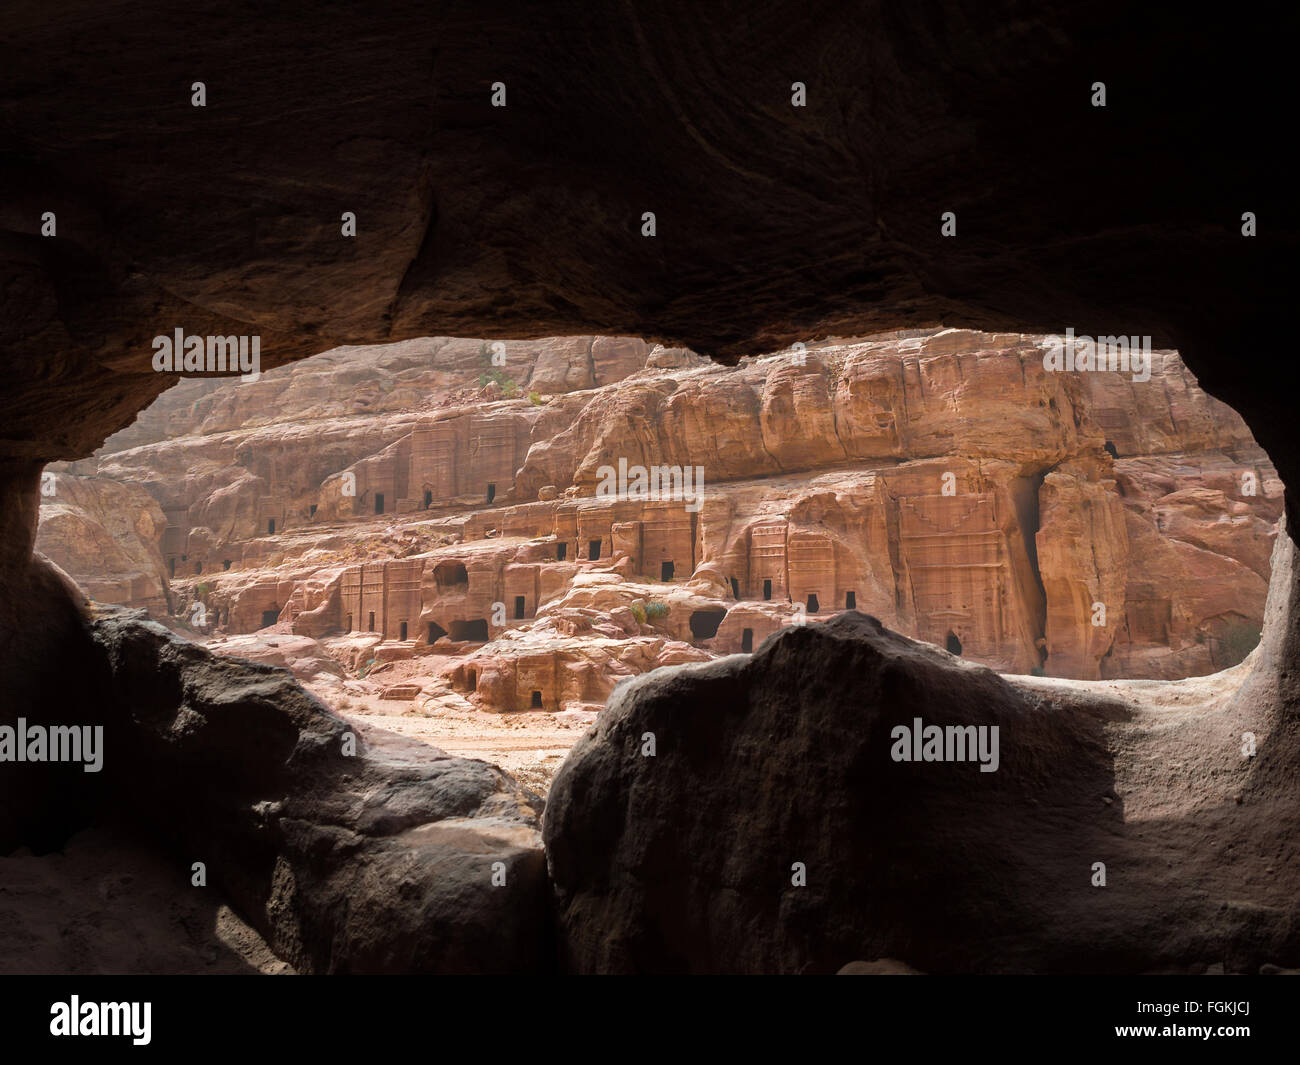 Petra mountain cut tombs of the Facades street seen from inside one of them Stock Photo